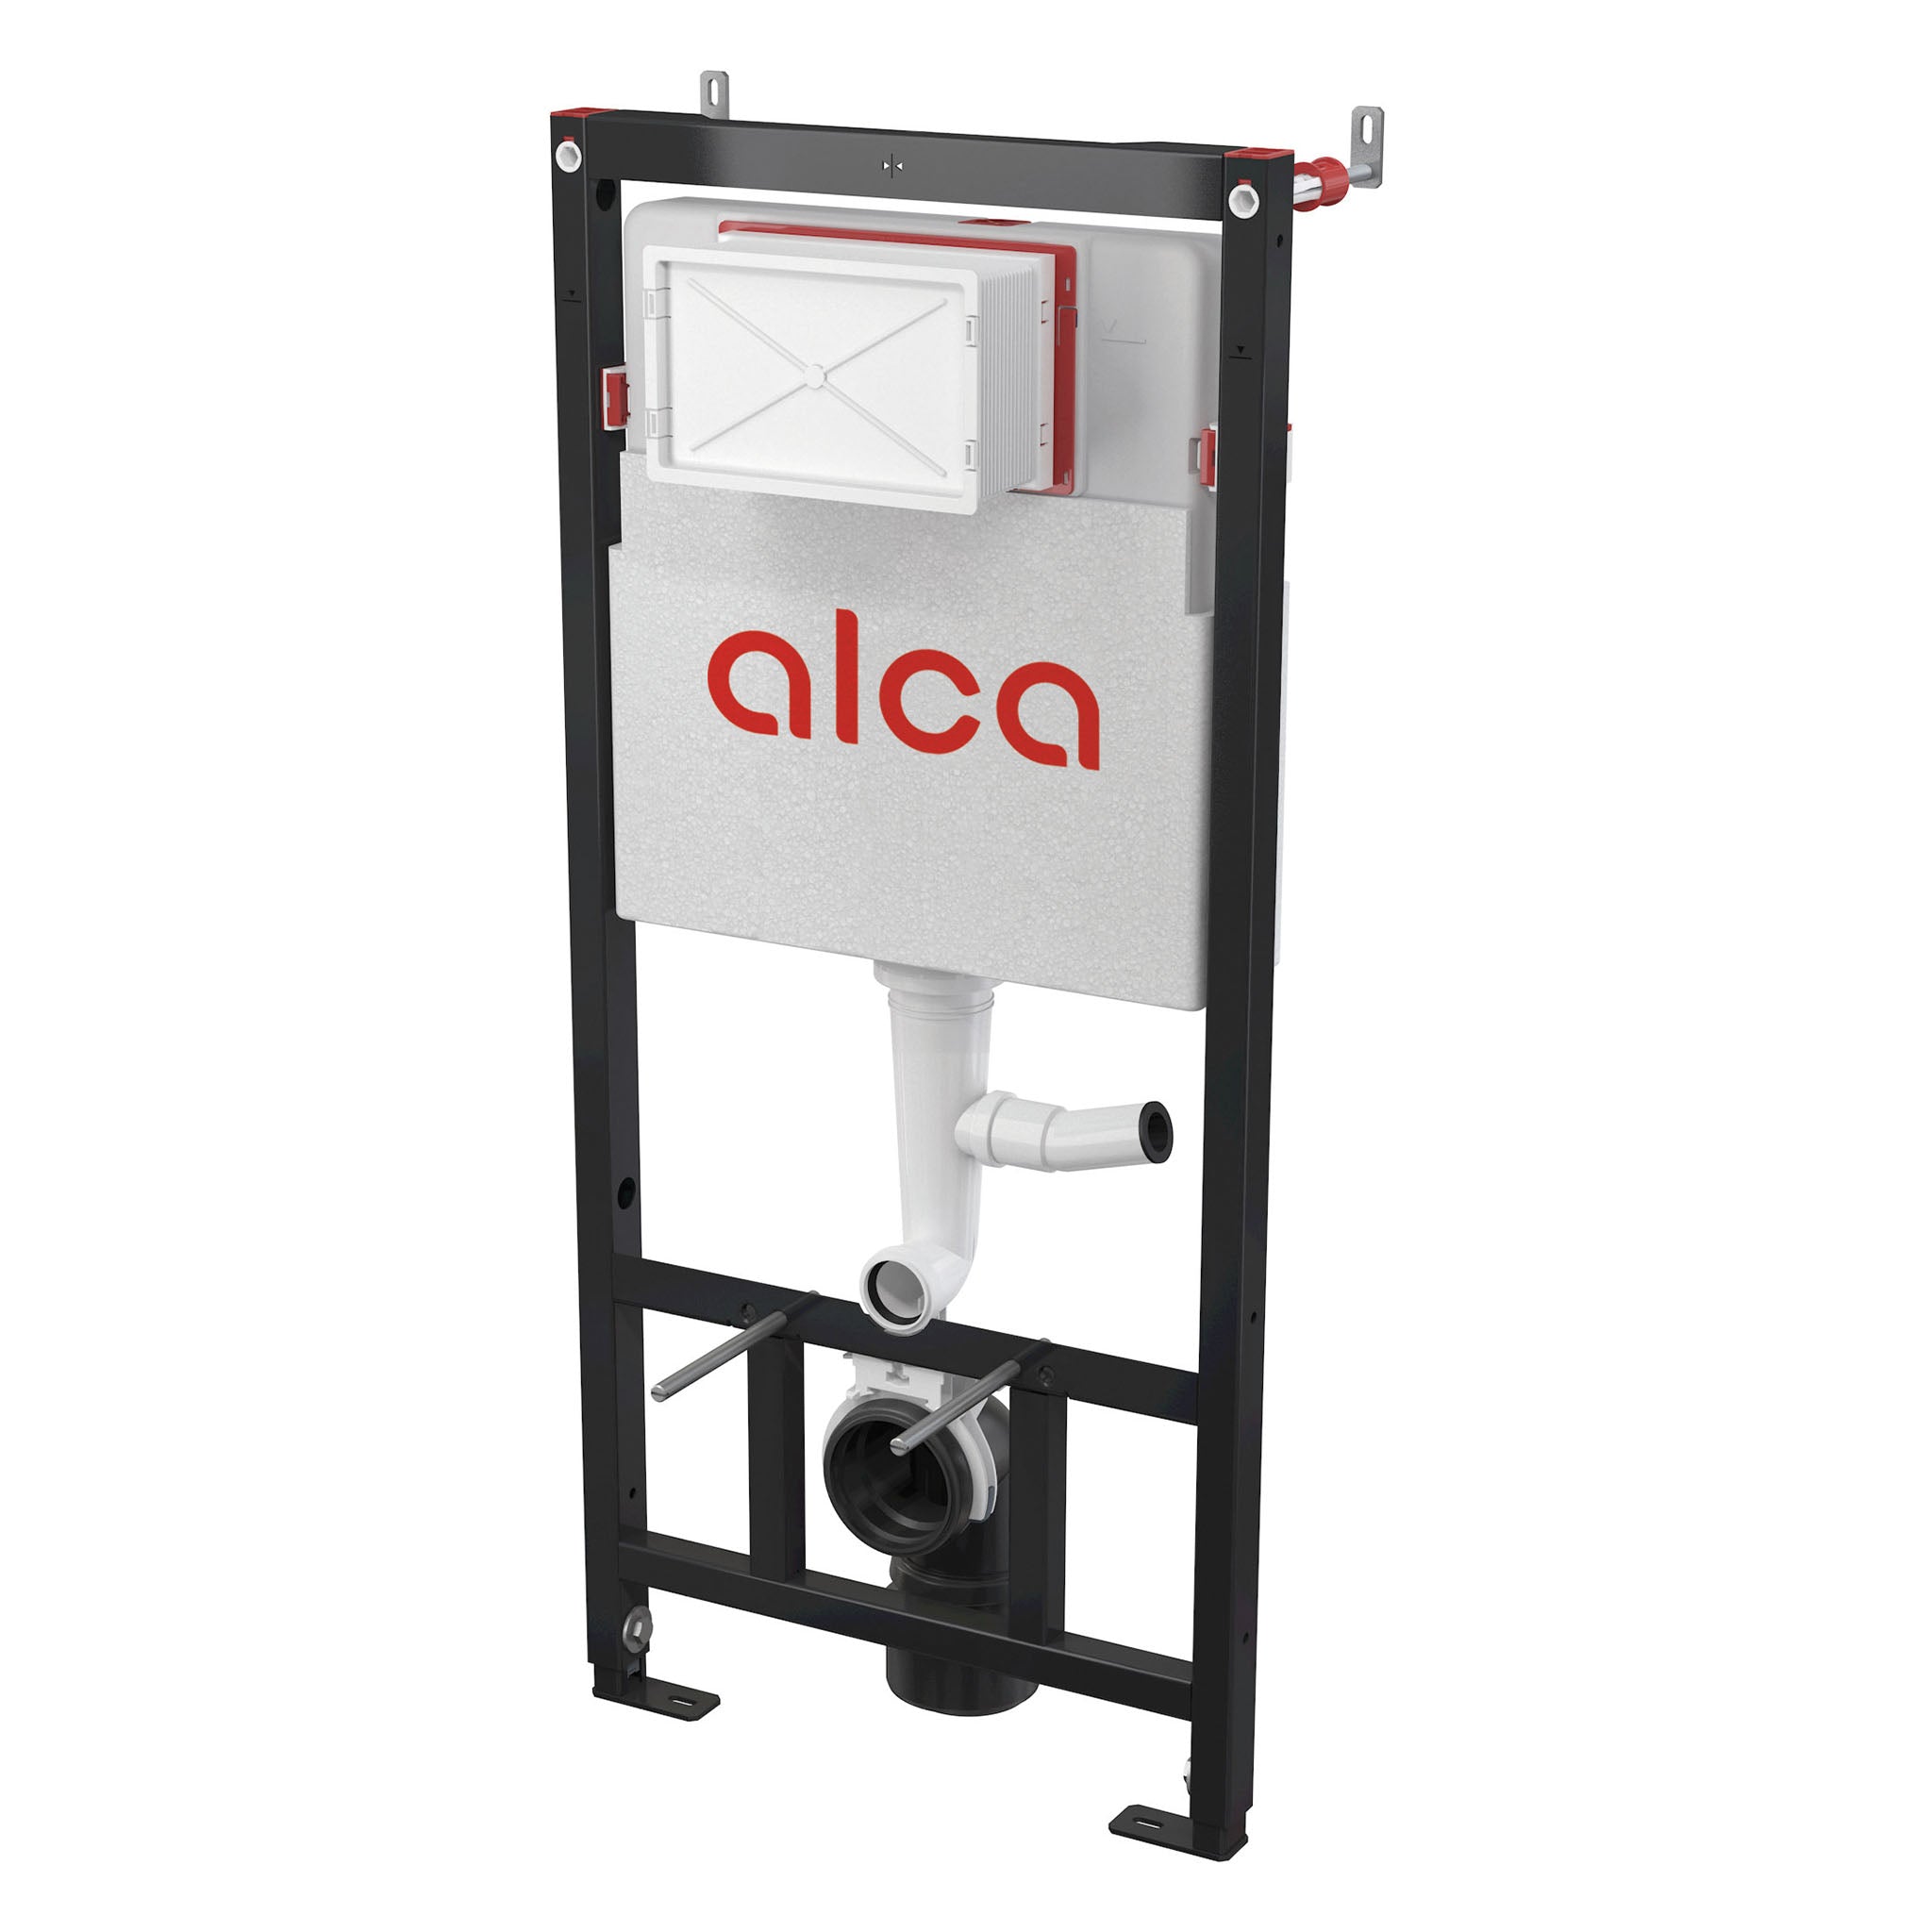 MyStyle Alca 1120mm Wall Mounted Toilet Frame & Concealed Cistern